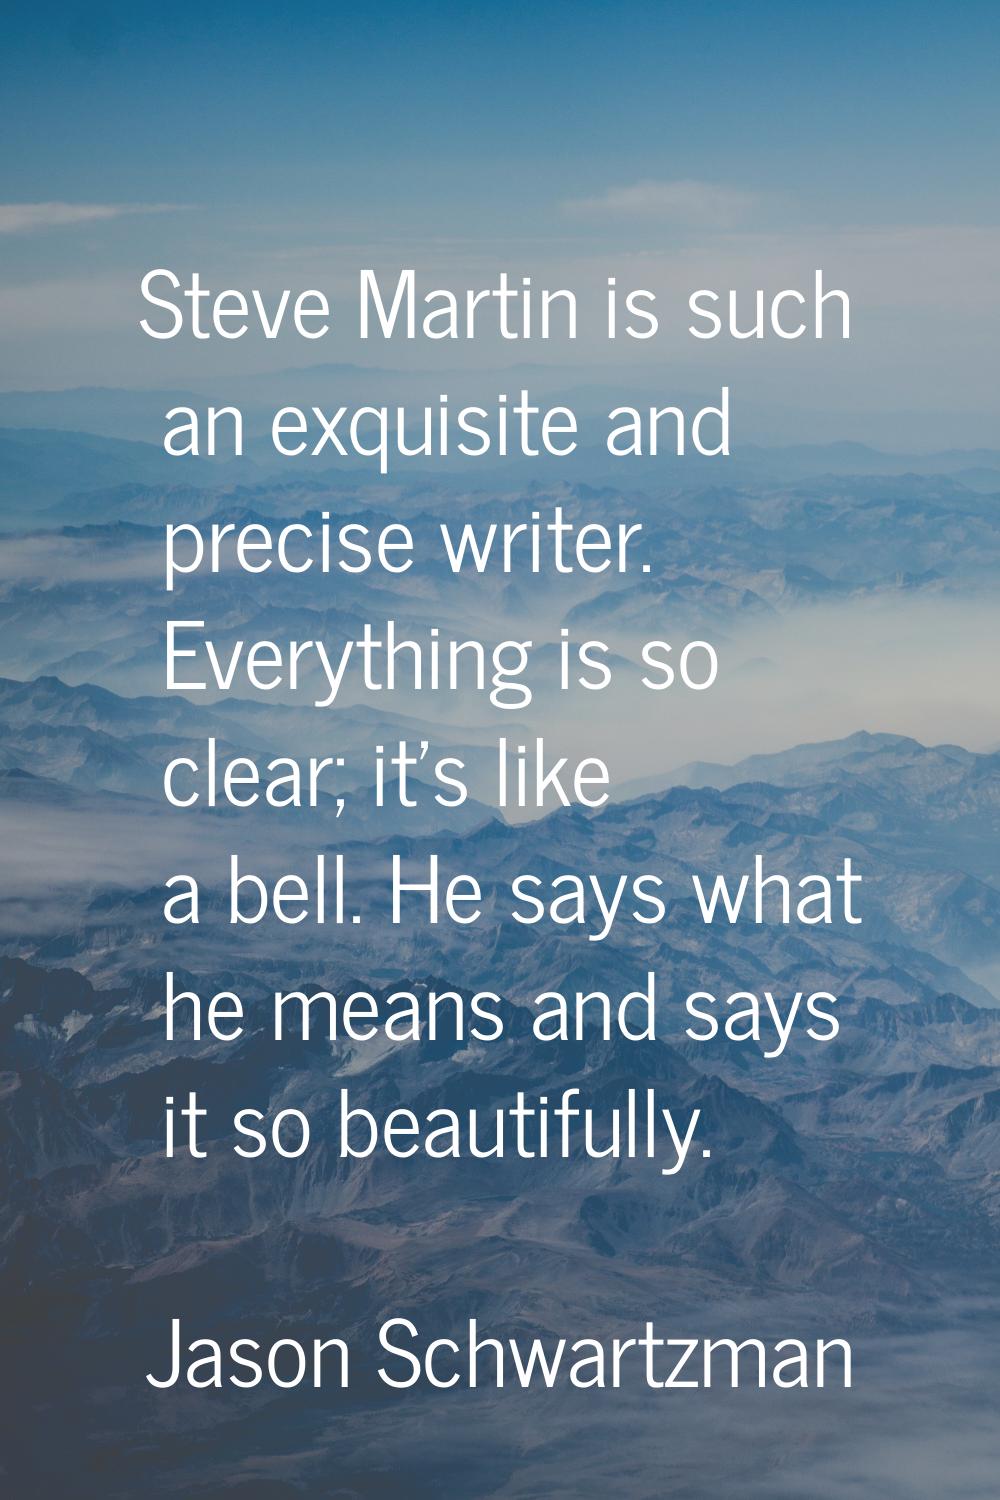 Steve Martin is such an exquisite and precise writer. Everything is so clear; it's like a bell. He 